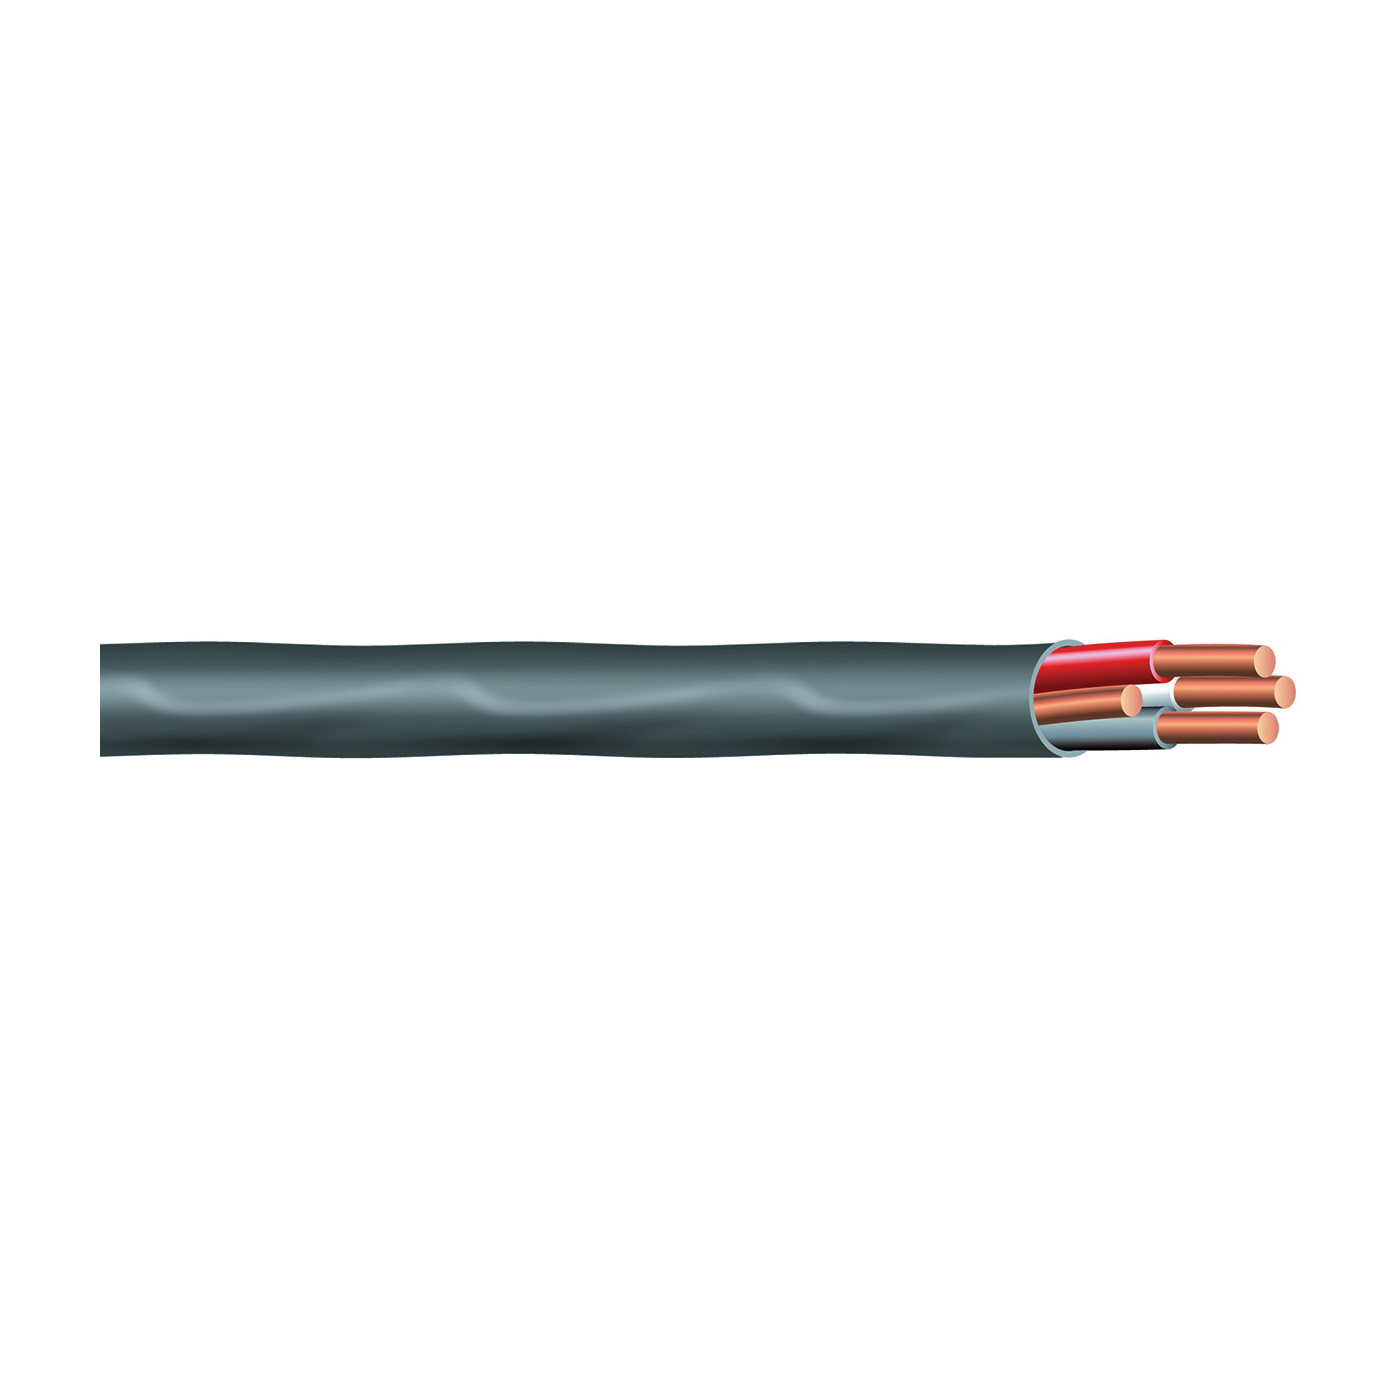 63950021 Sheathed Cable, 6 AWG Wire, 3 -Conductor, 25 ft L, Copper Conductor, PVC Insulation